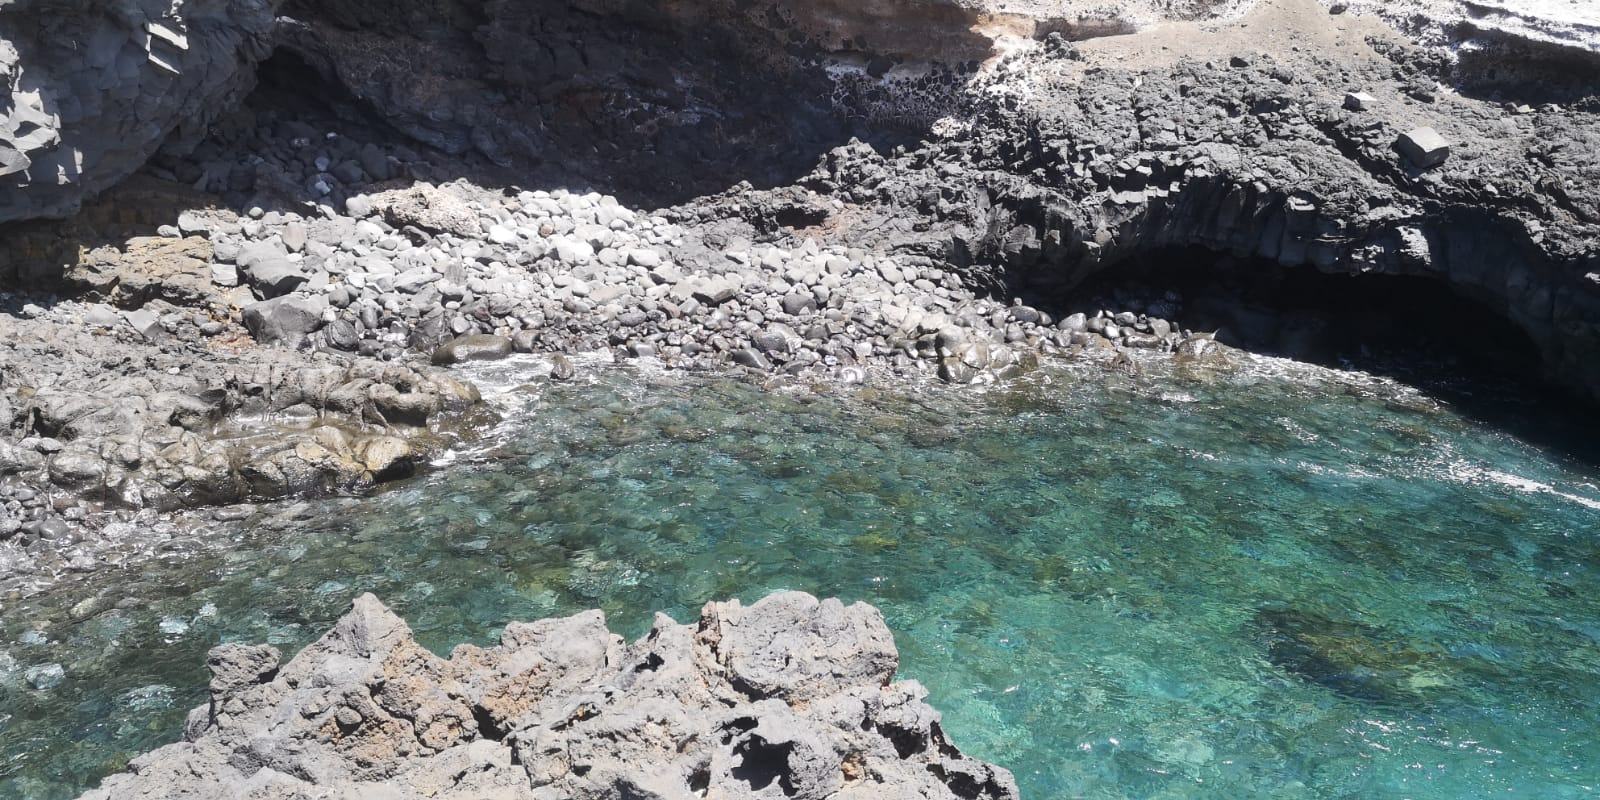 The coast of Isla Baja is full of charming natural swimming pools with crystal clear water